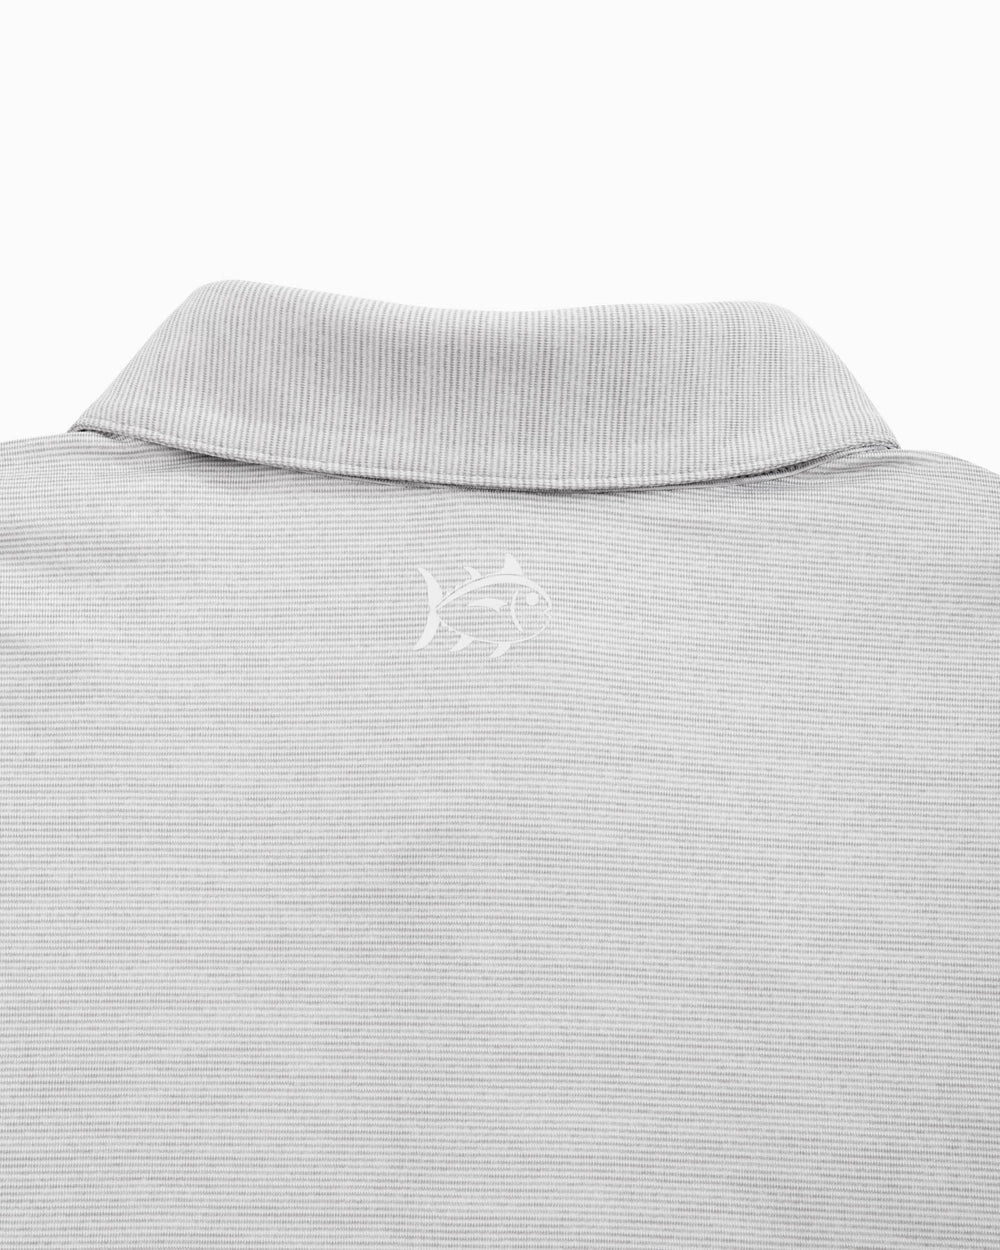 The yoke of the College of Charleston Driver Spacedye Polo Shirt by Southern Tide - Slate Grey